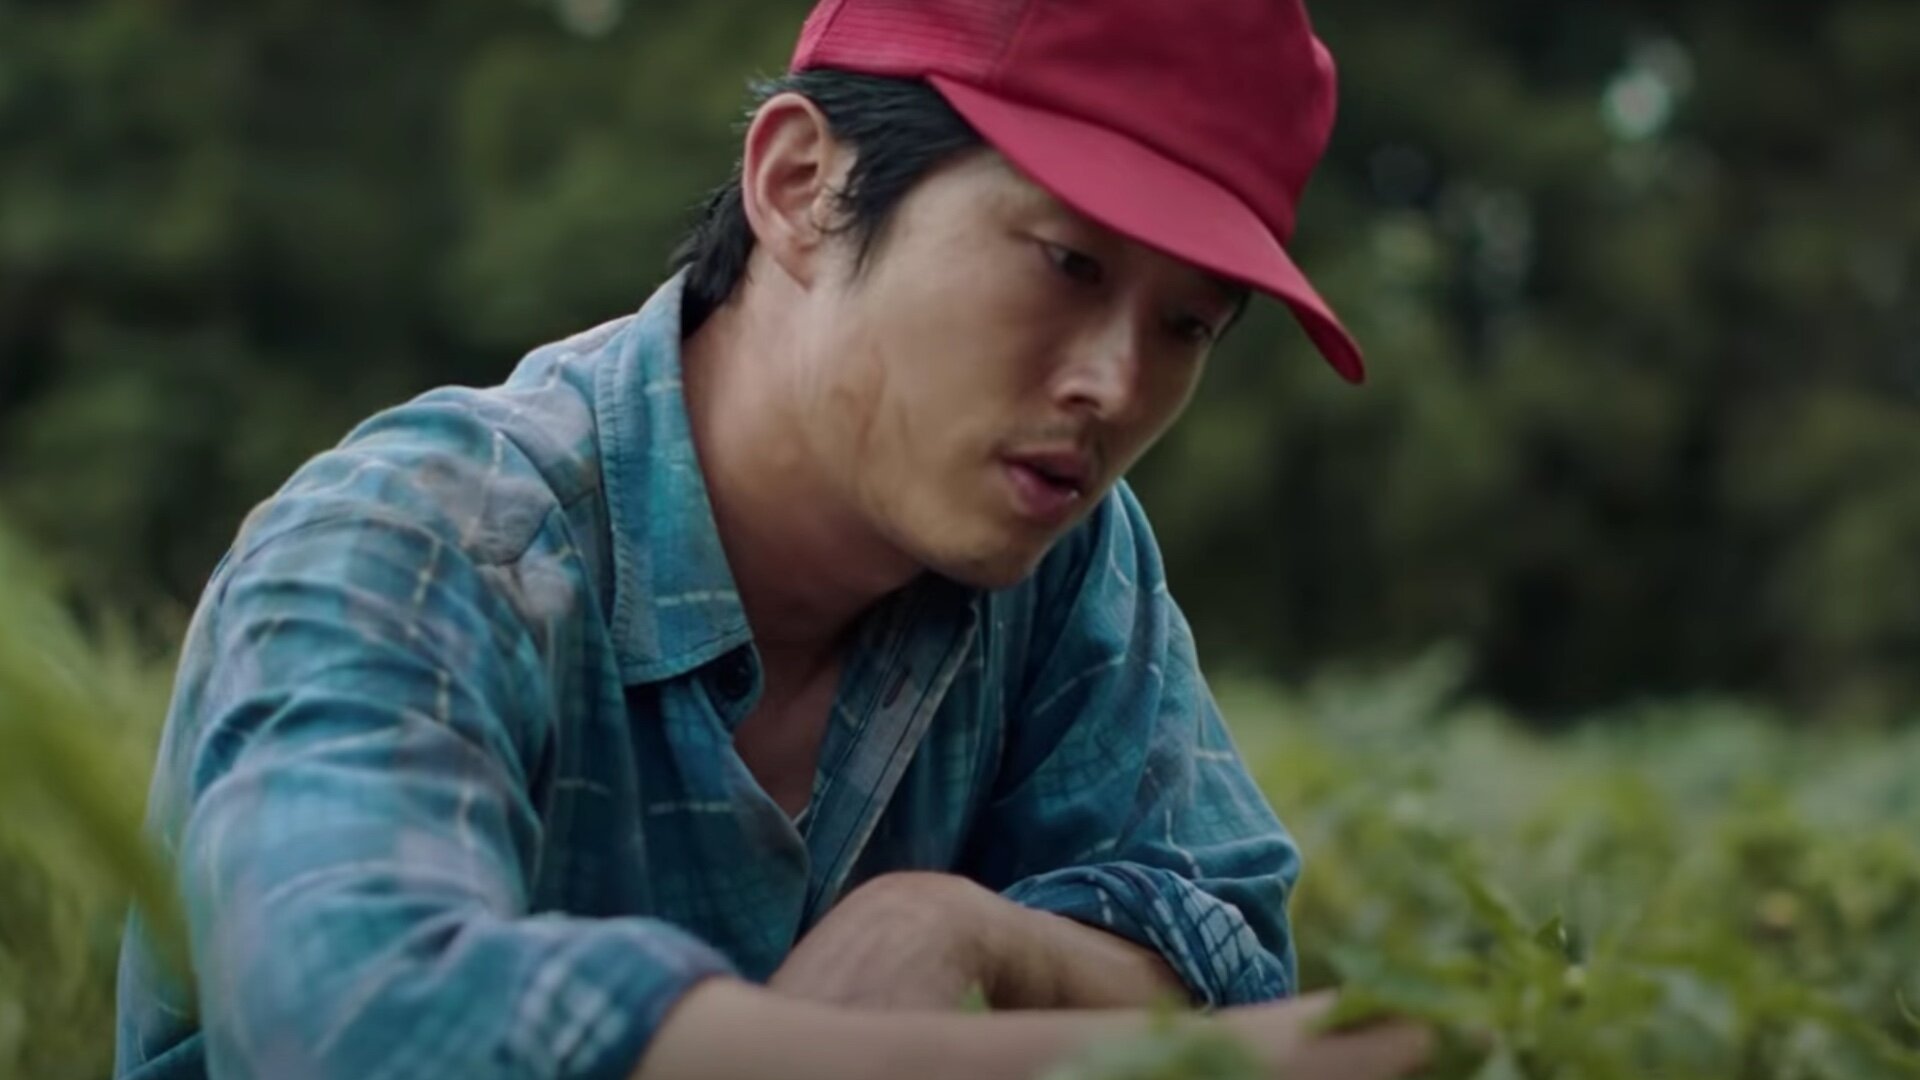 Trailer For Steven Yeun's MINARI Which Tells a Tender Story of a Korean Family in Search of The American Dream — GeekTyrant